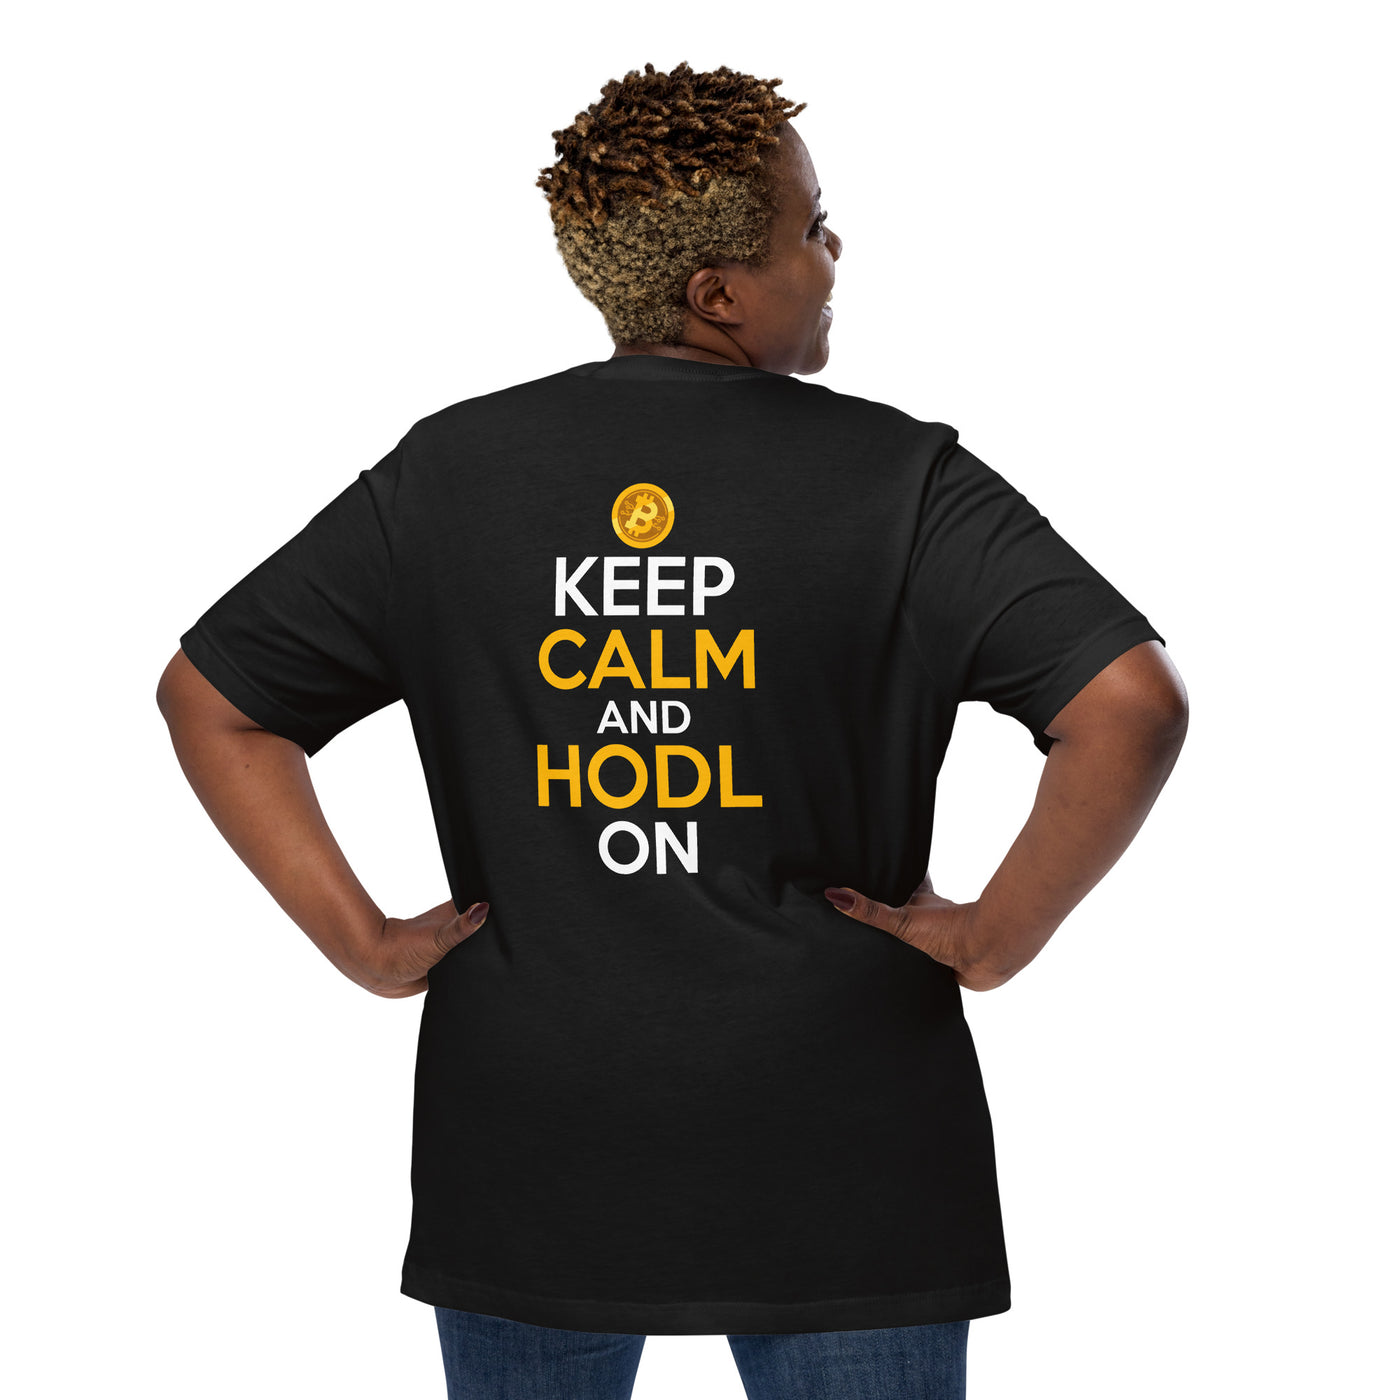 Keep Calm and HODL On ( Yellow and White Text ) - Unisex t-shirt ( Back Print )